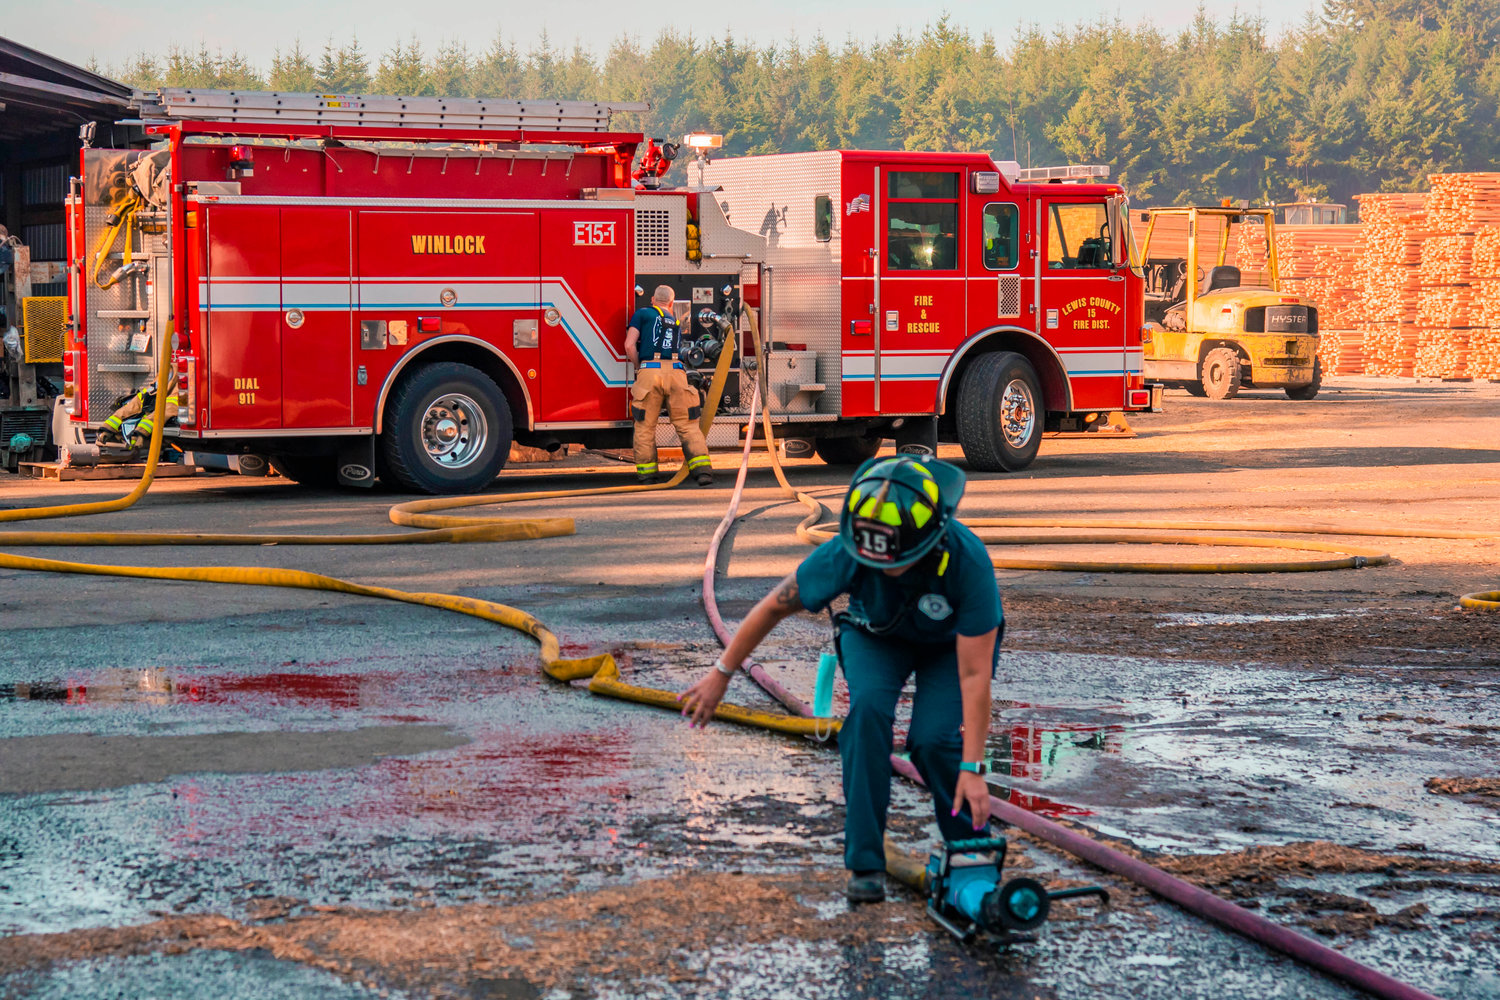 Lewis County Fire District 15 firefighters respond to the scene of a fire at Winlock Fibre early Wednesday morning.